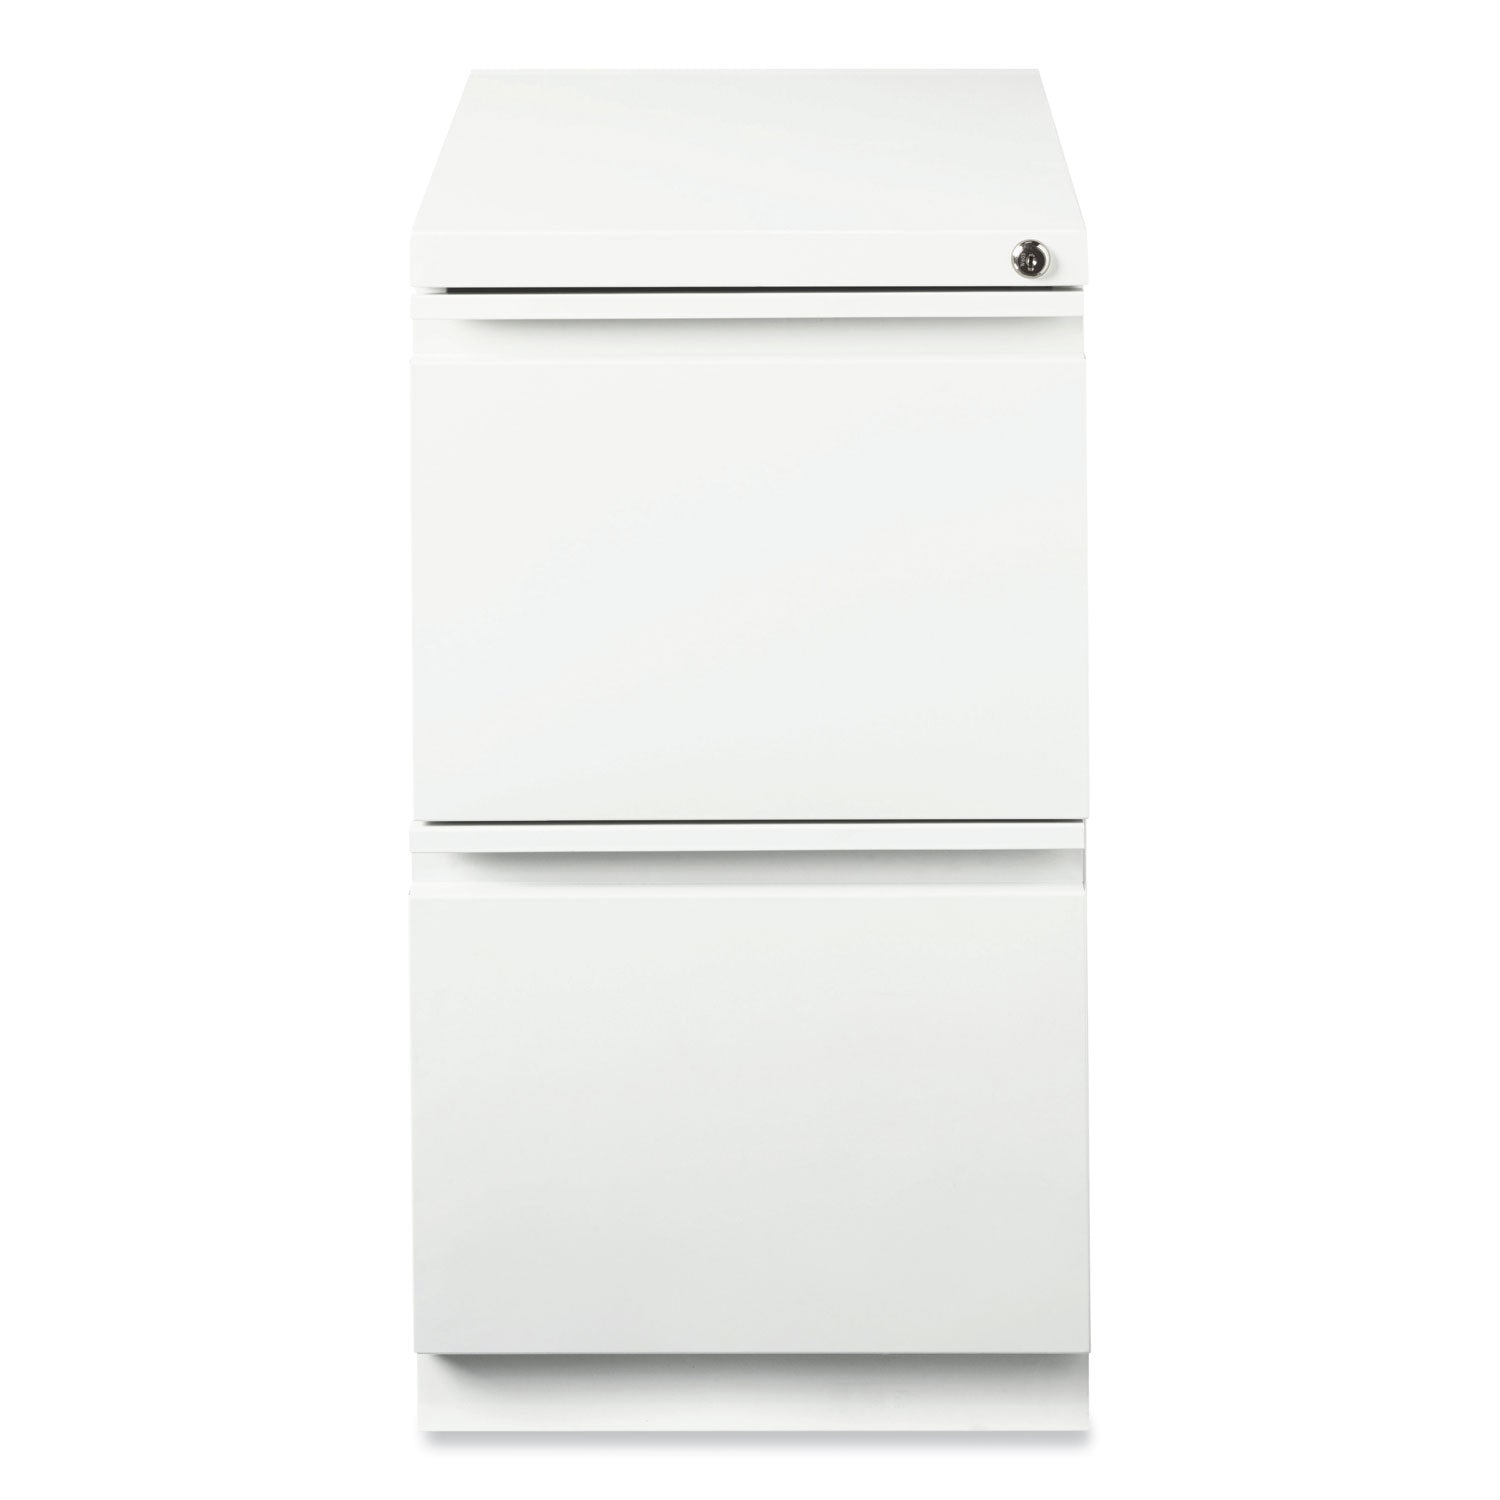 full-width-pull-20-deep-mobile-pedestal-file-2-drawer-file-file-letter-white-15x1988x2775-ships-in-4-6-business-days_hid19357 - 2